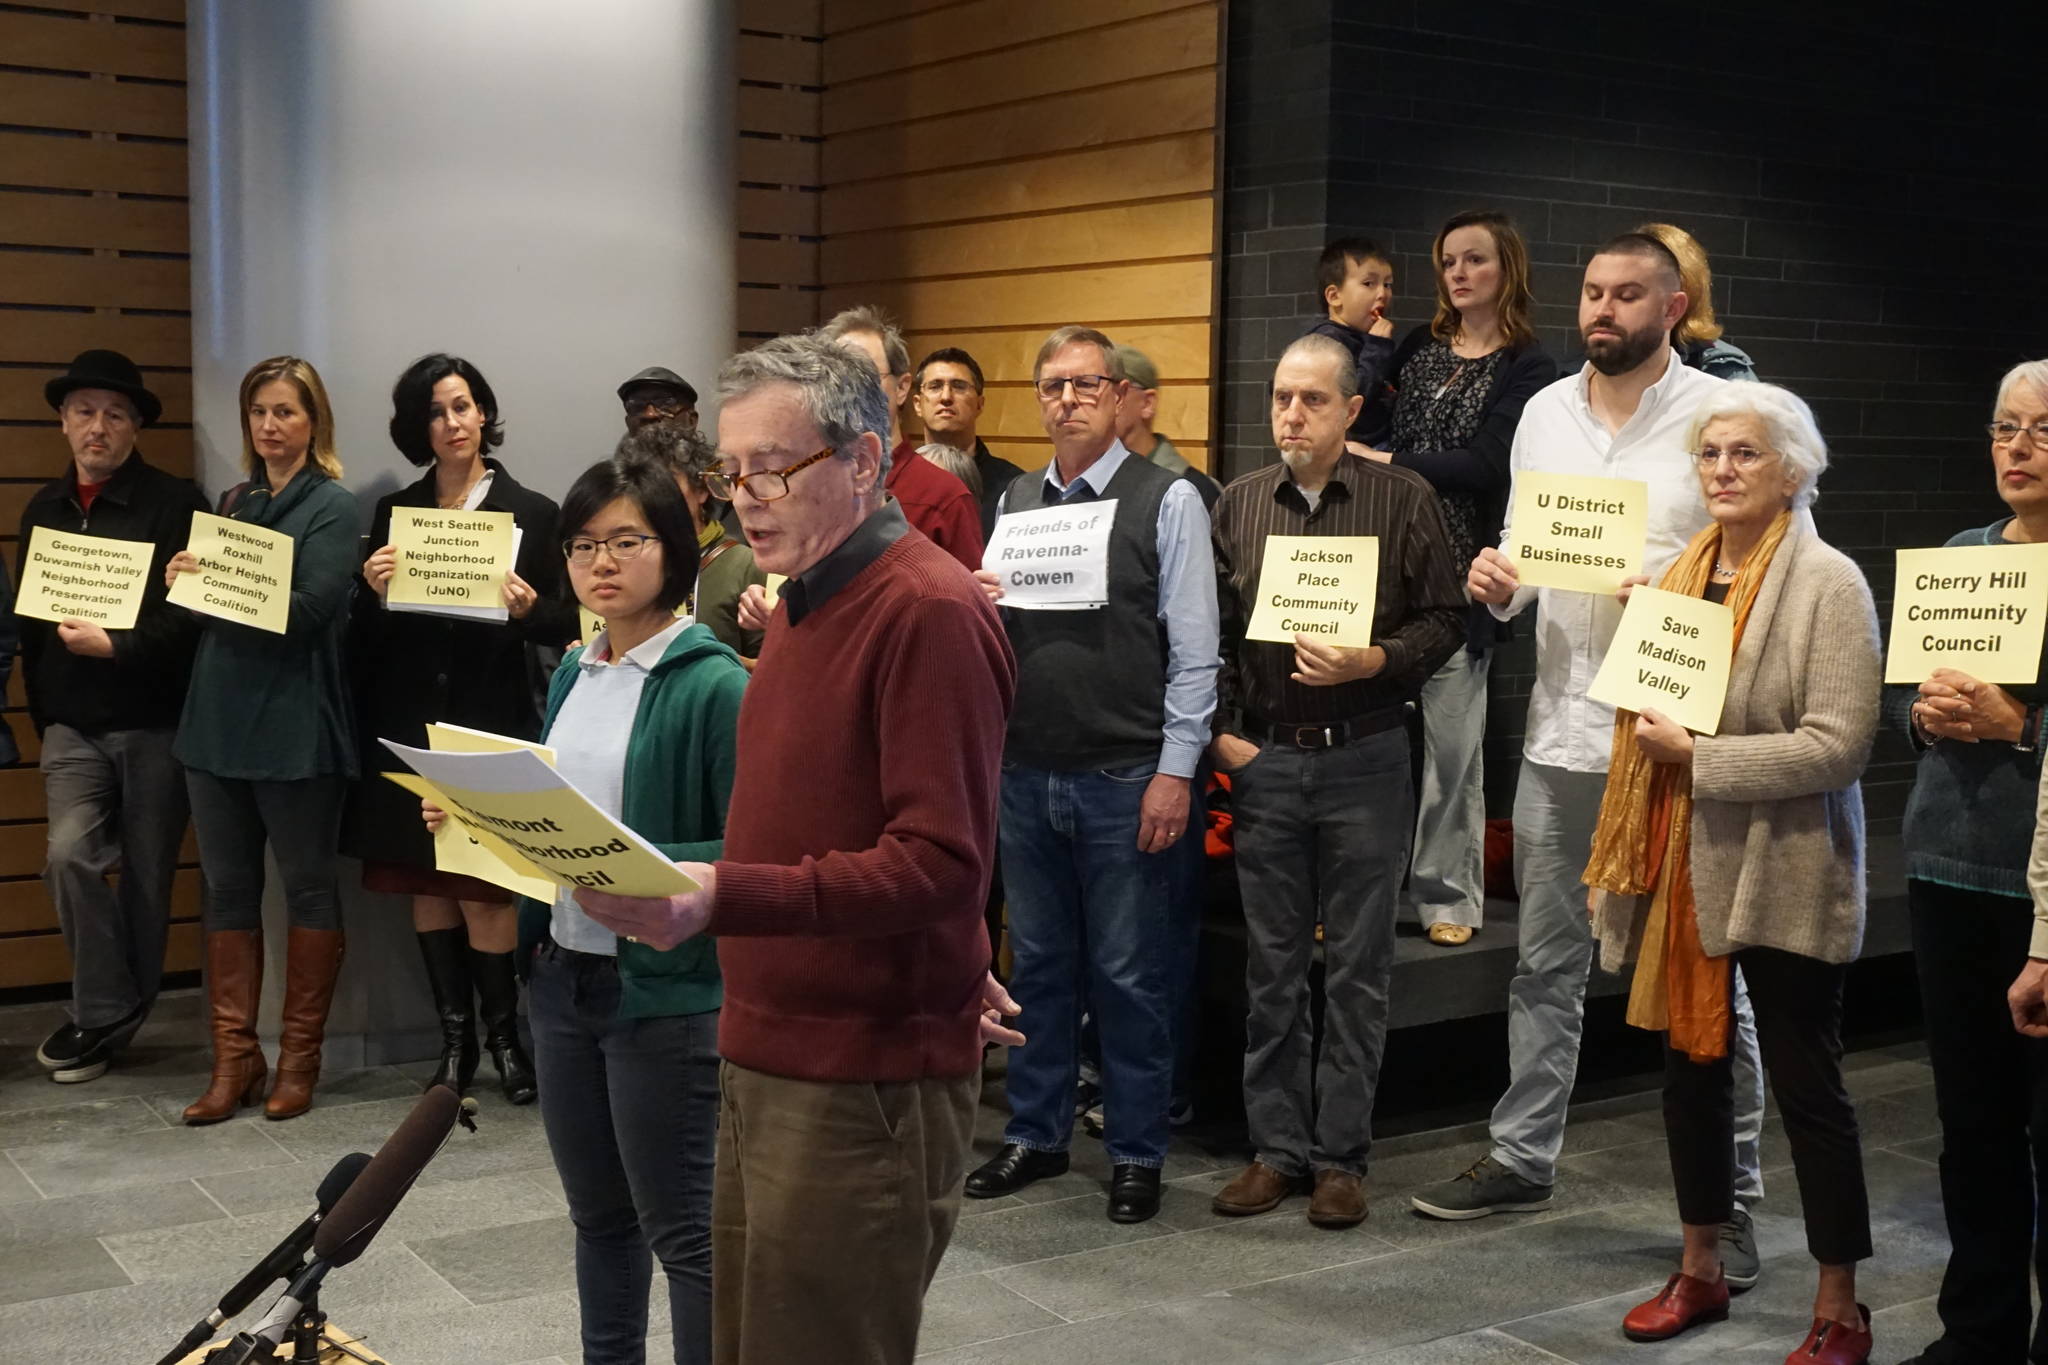 The Seattle Coalition for Affordability, Livability and Equity filed an appeal to the Seattle Hearing Examiner on Monday evening. Photo by Melissa Hellmann